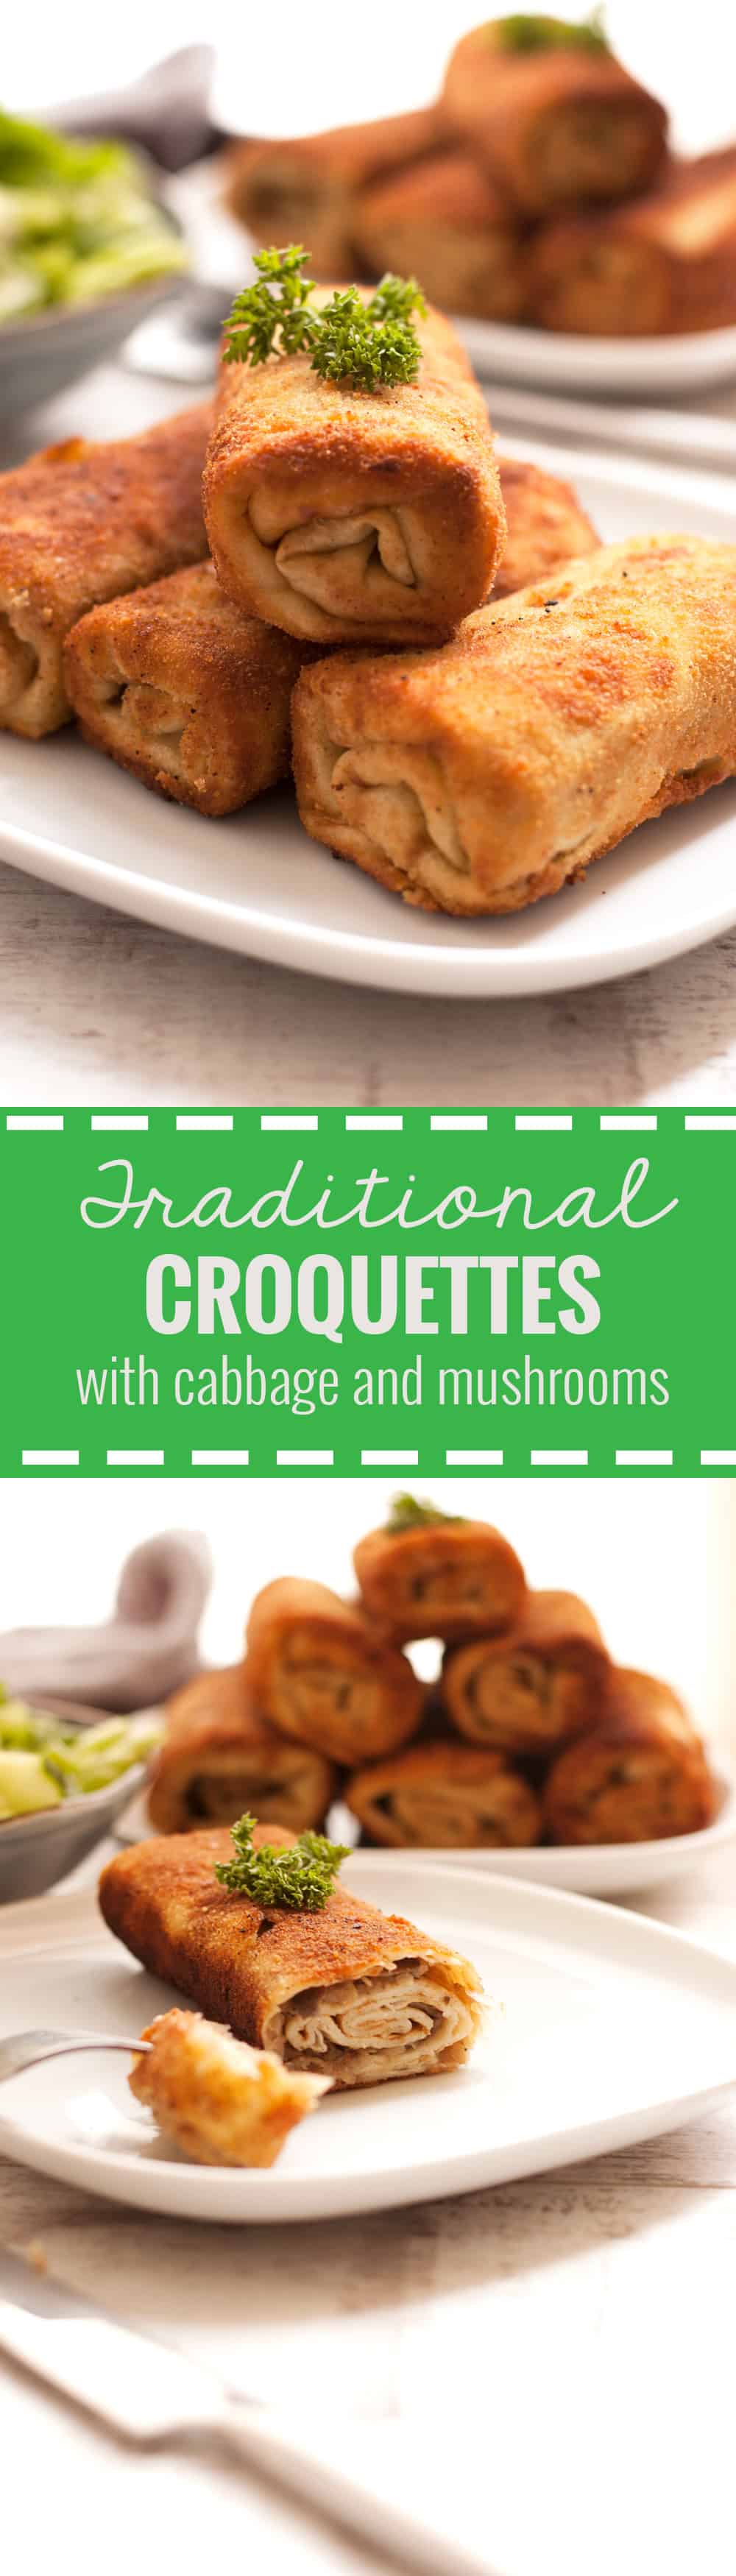 Traditional cabbage and mushroom croquettes. Delicious, vegan version of this eastern- European classic, easy to prepare dinner idea! Yum!|http://annabanana.co/